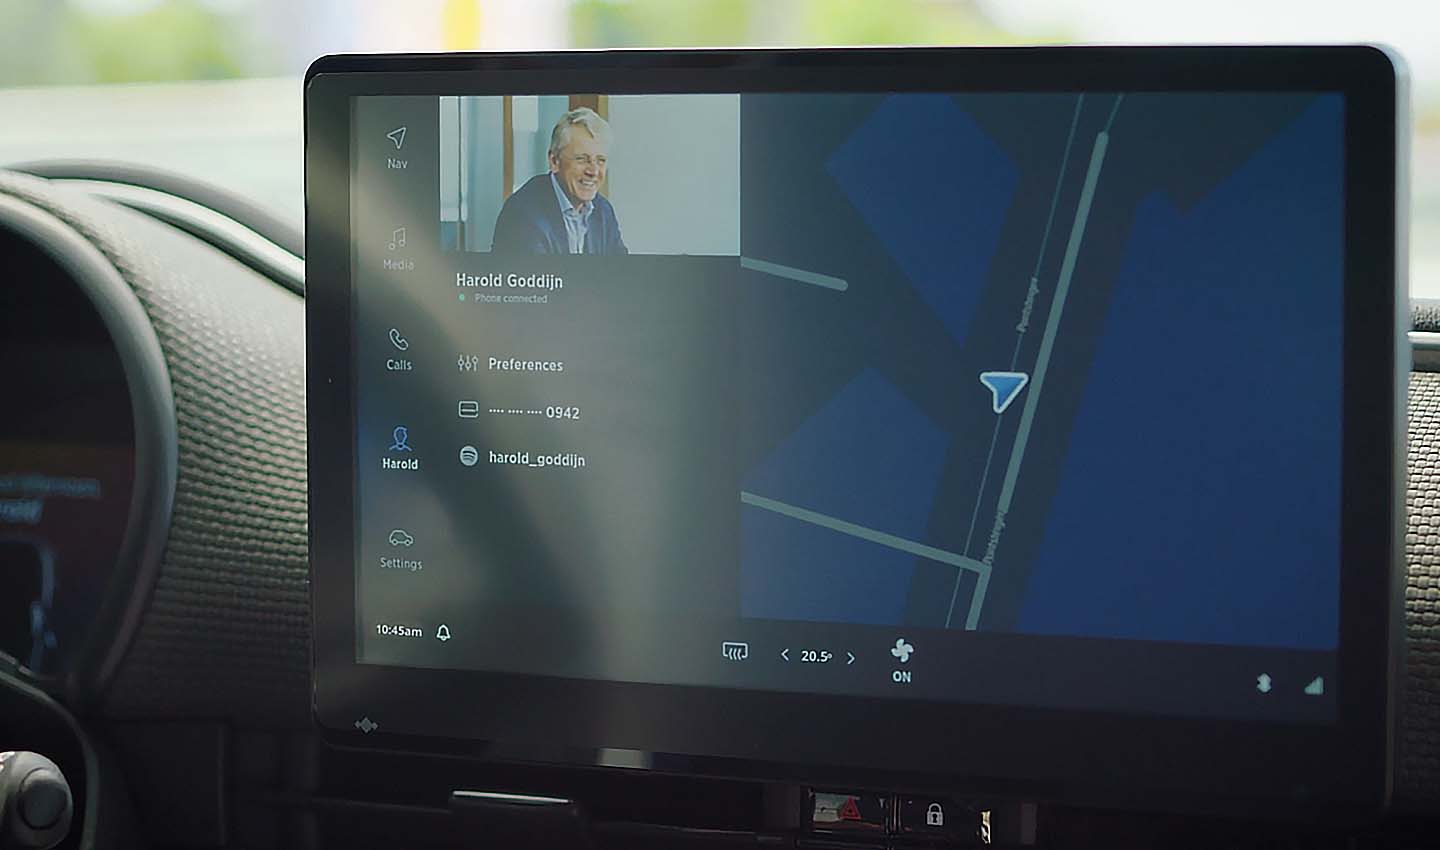 When the driver enters an TomTom IndiGO equipped vehicle, it will recognize them based on their phone connection and sync their preferences and important information, such as upcoming calendar events.